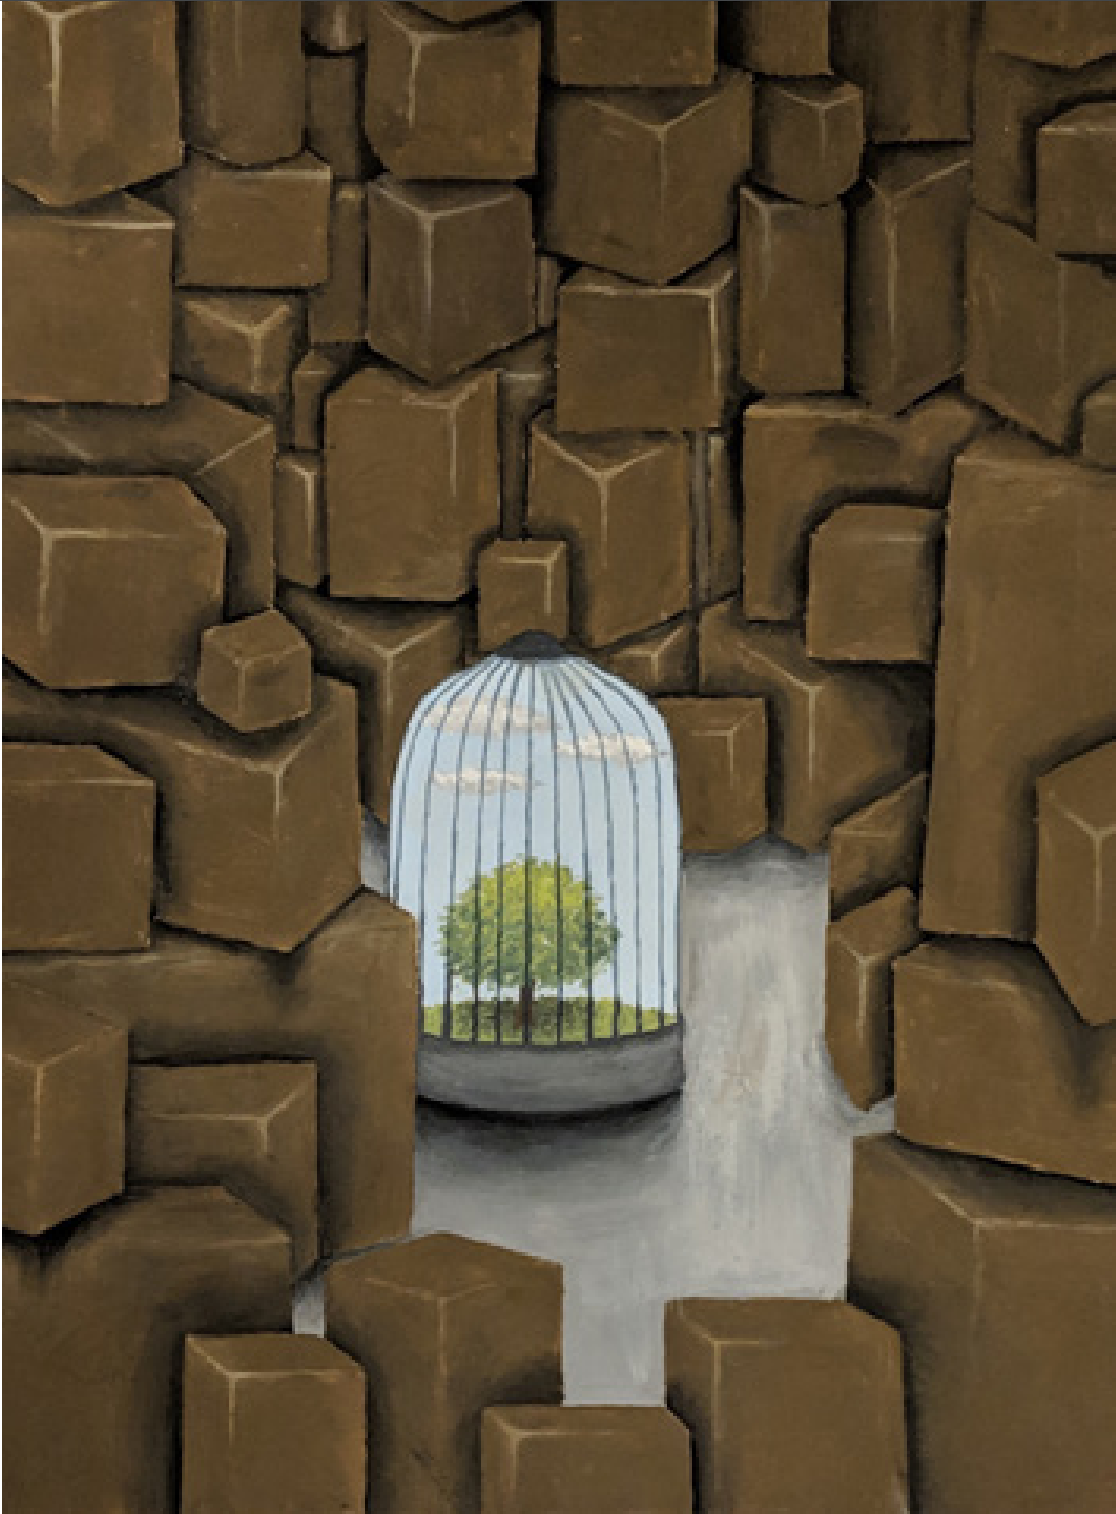  MALIA COOK  Beautiful Bird Cage Among Boxes  Acrylic on paper, pen for cage bars  ArtNow 2019 Dare  Grade 10  Pioneer High School  Instructor: Laurie K Kirk   ”The birdcage contains a vibrant, colorful personality in the otherwise lackluster room fu